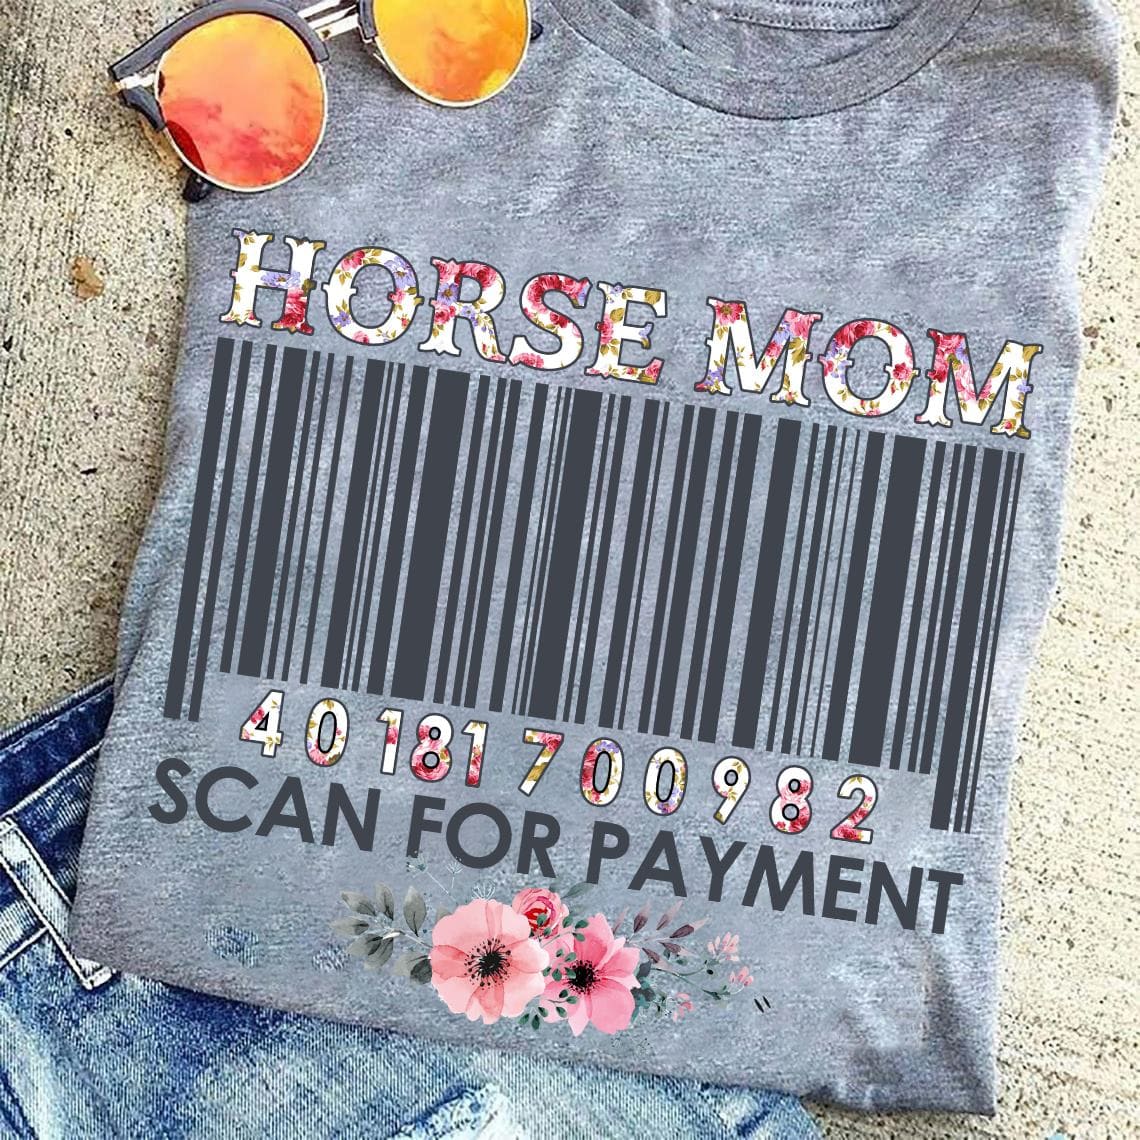 Horse mom - Scan for payment, gift for horse lover